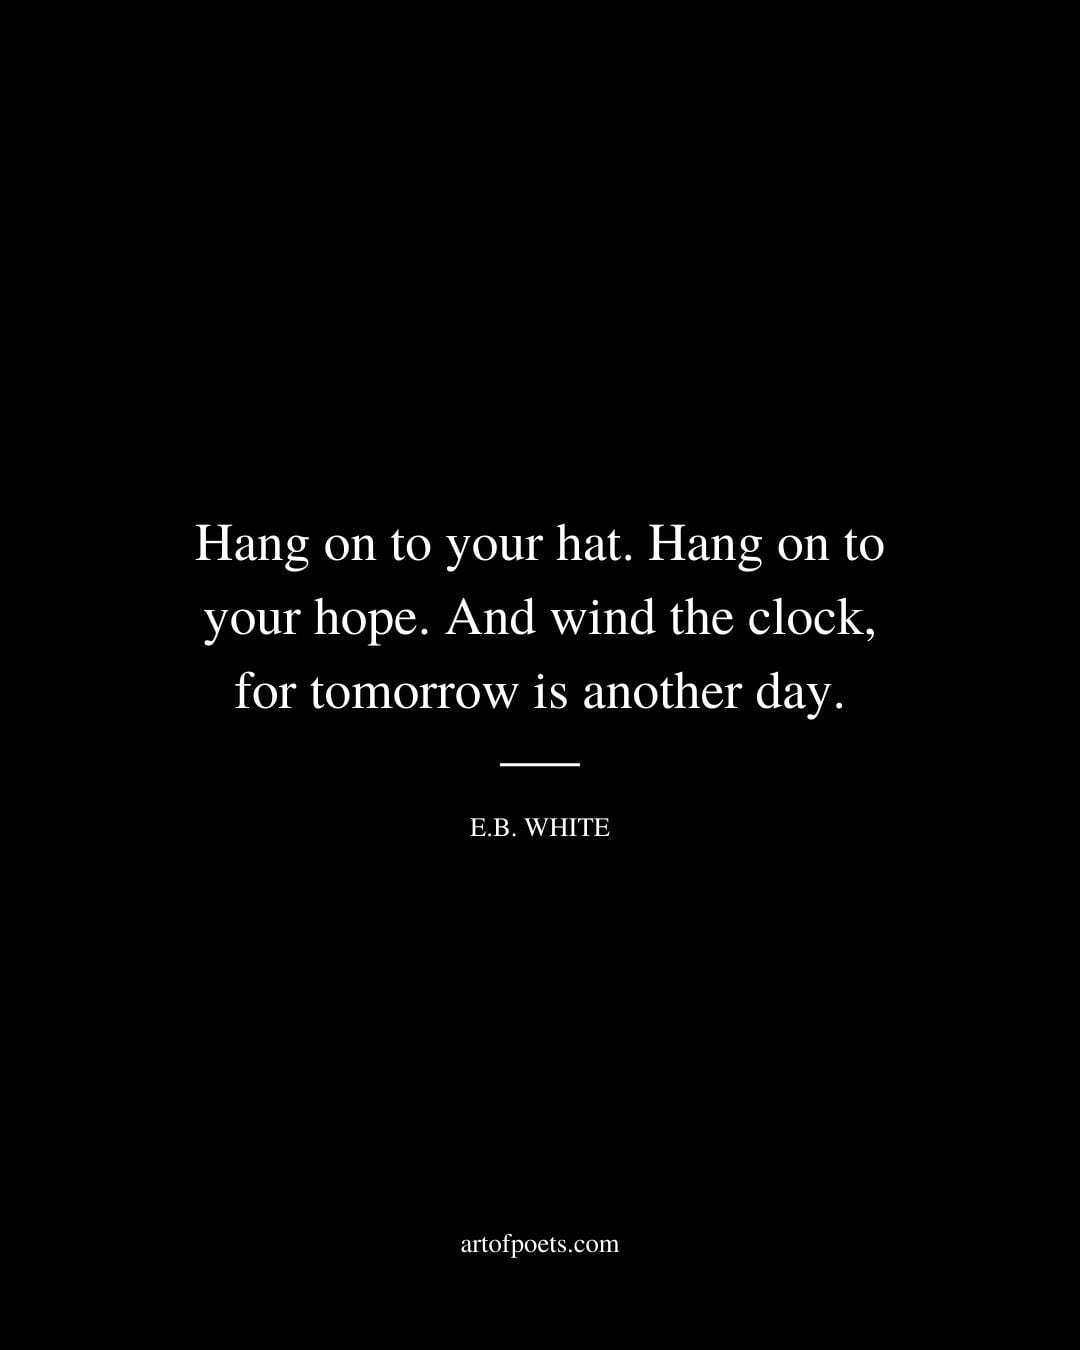 Hang on to your hat. Hang on to your hope. And wind the clock for tomorrow is another day. E.B. White